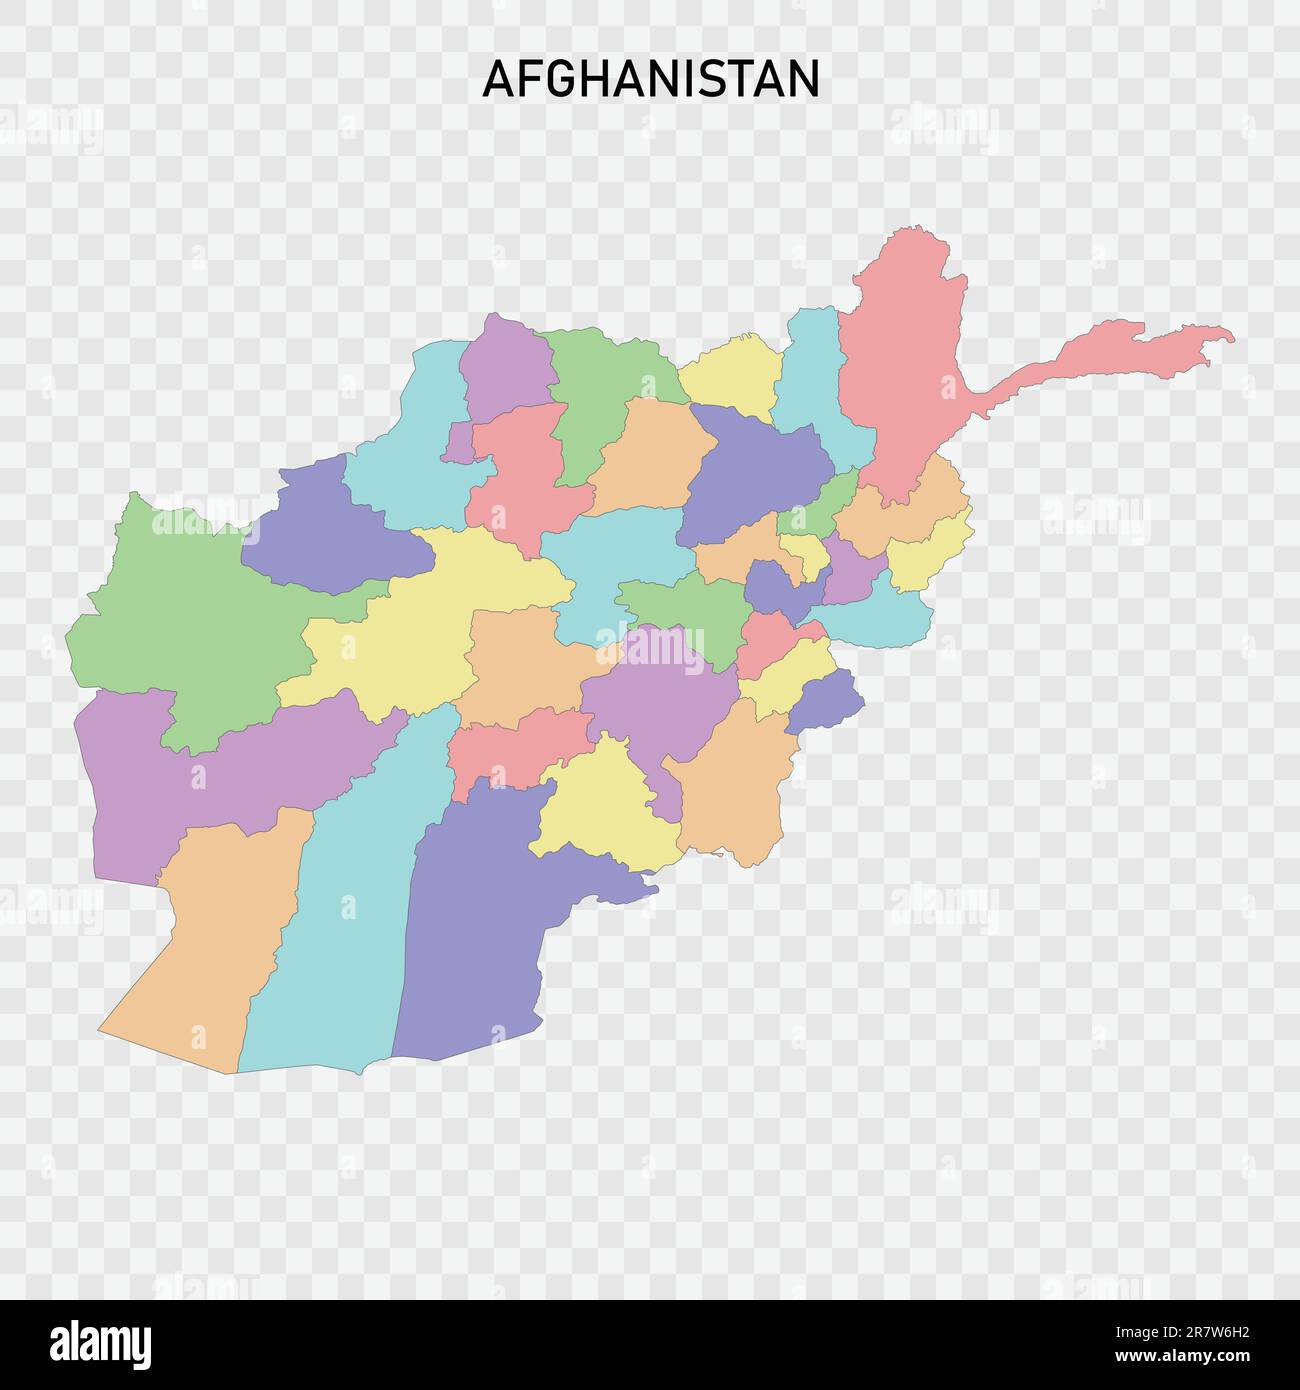 Isolated colored map of Afghanistan with borders of the regions Stock Vector